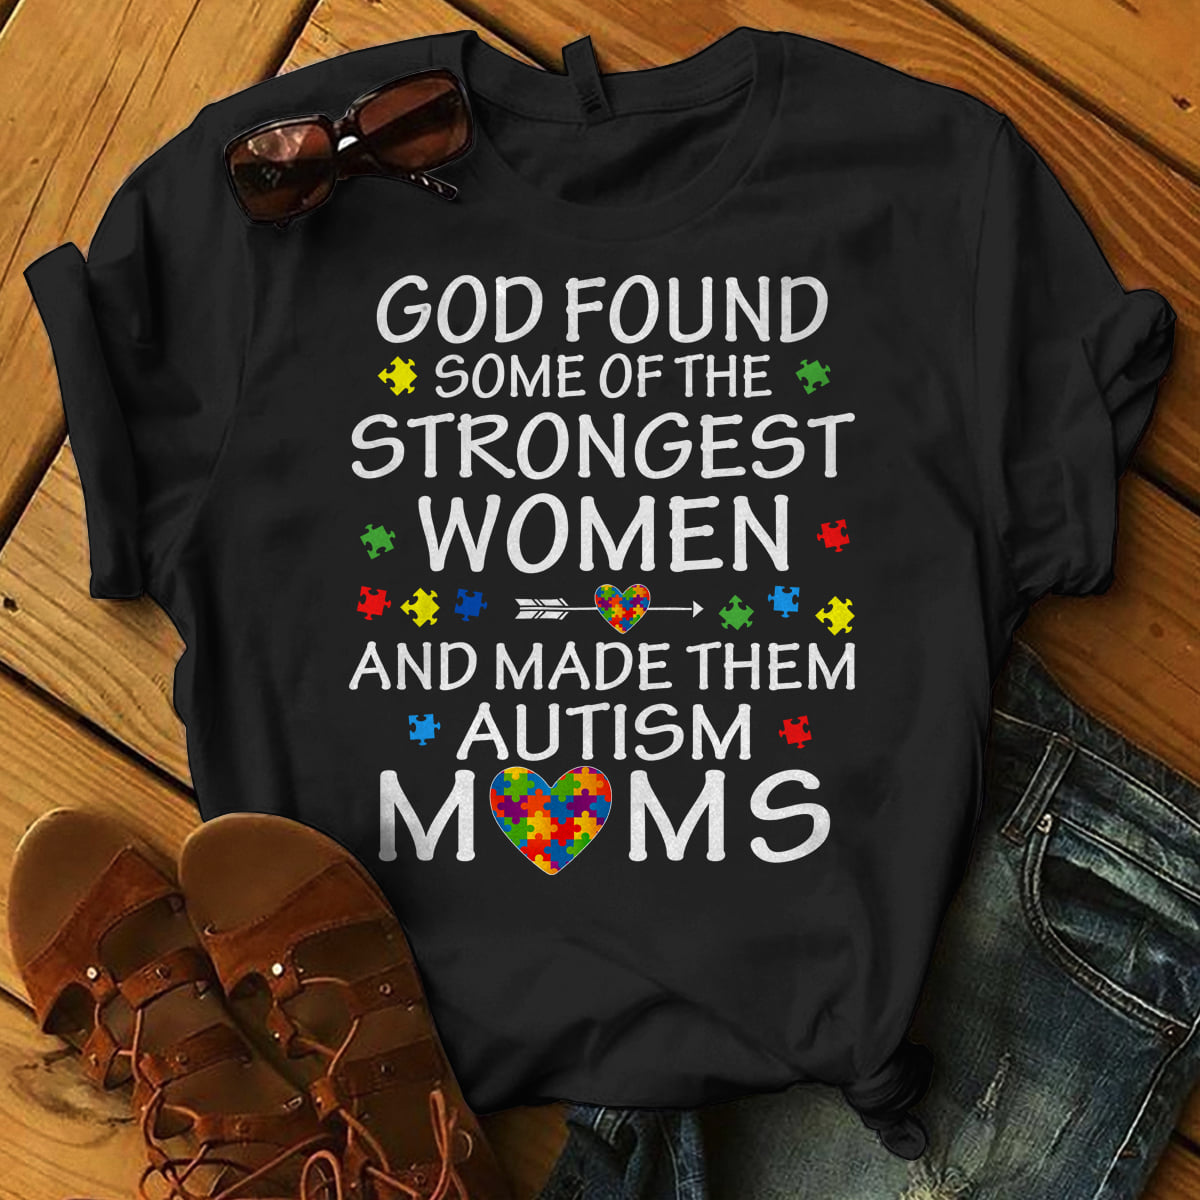 God found soem of the strongest women and make them autism moms - Autism awareness